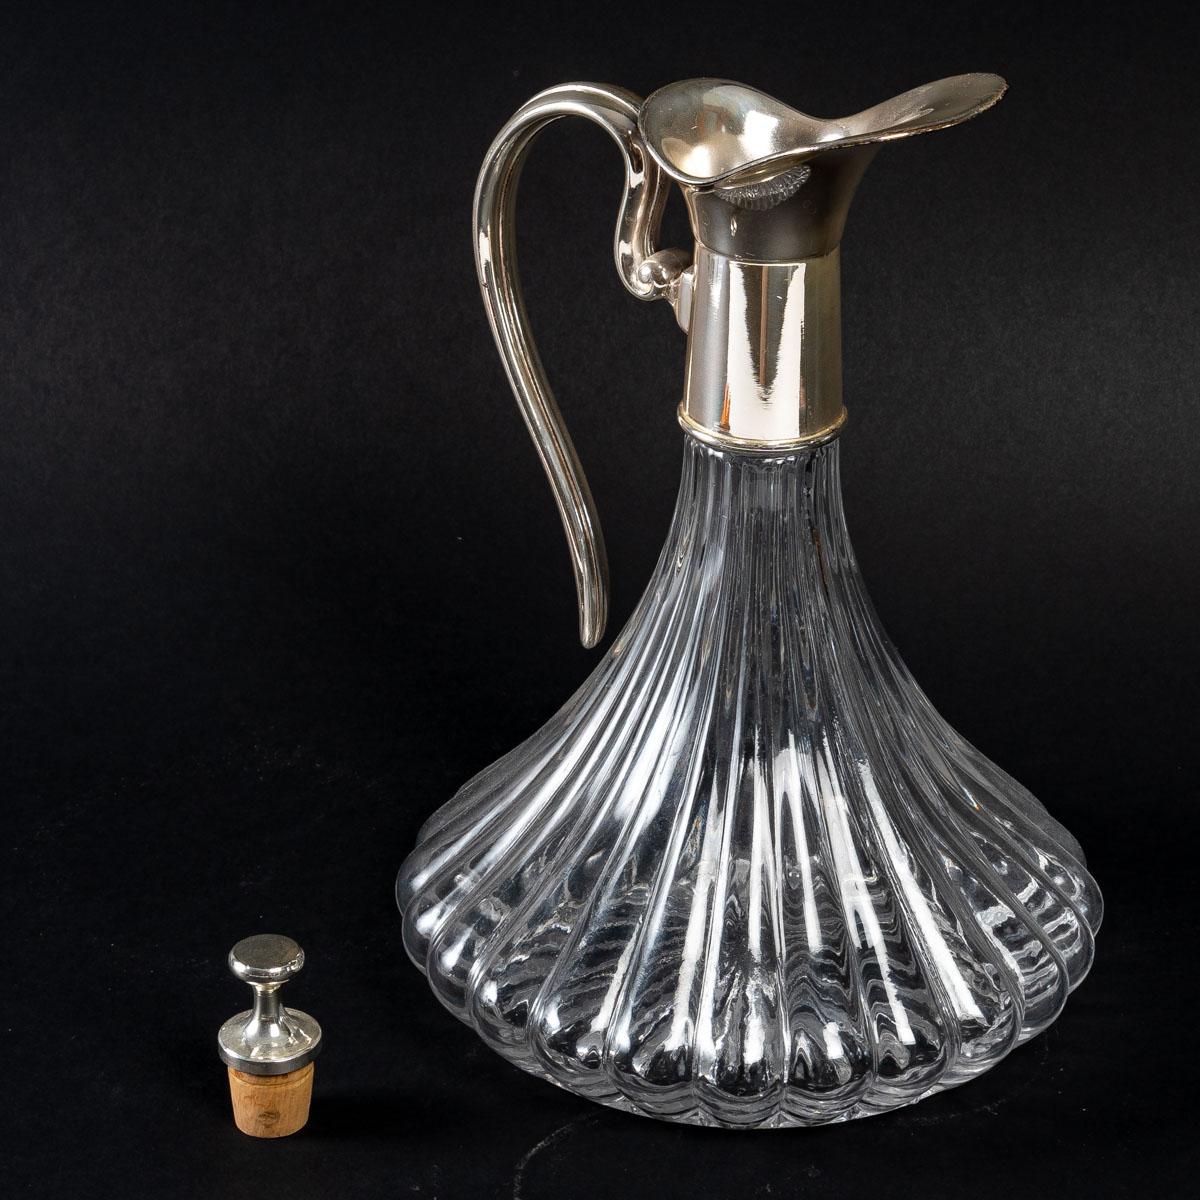 Metal Decanter and Its Stopper, 20th Century